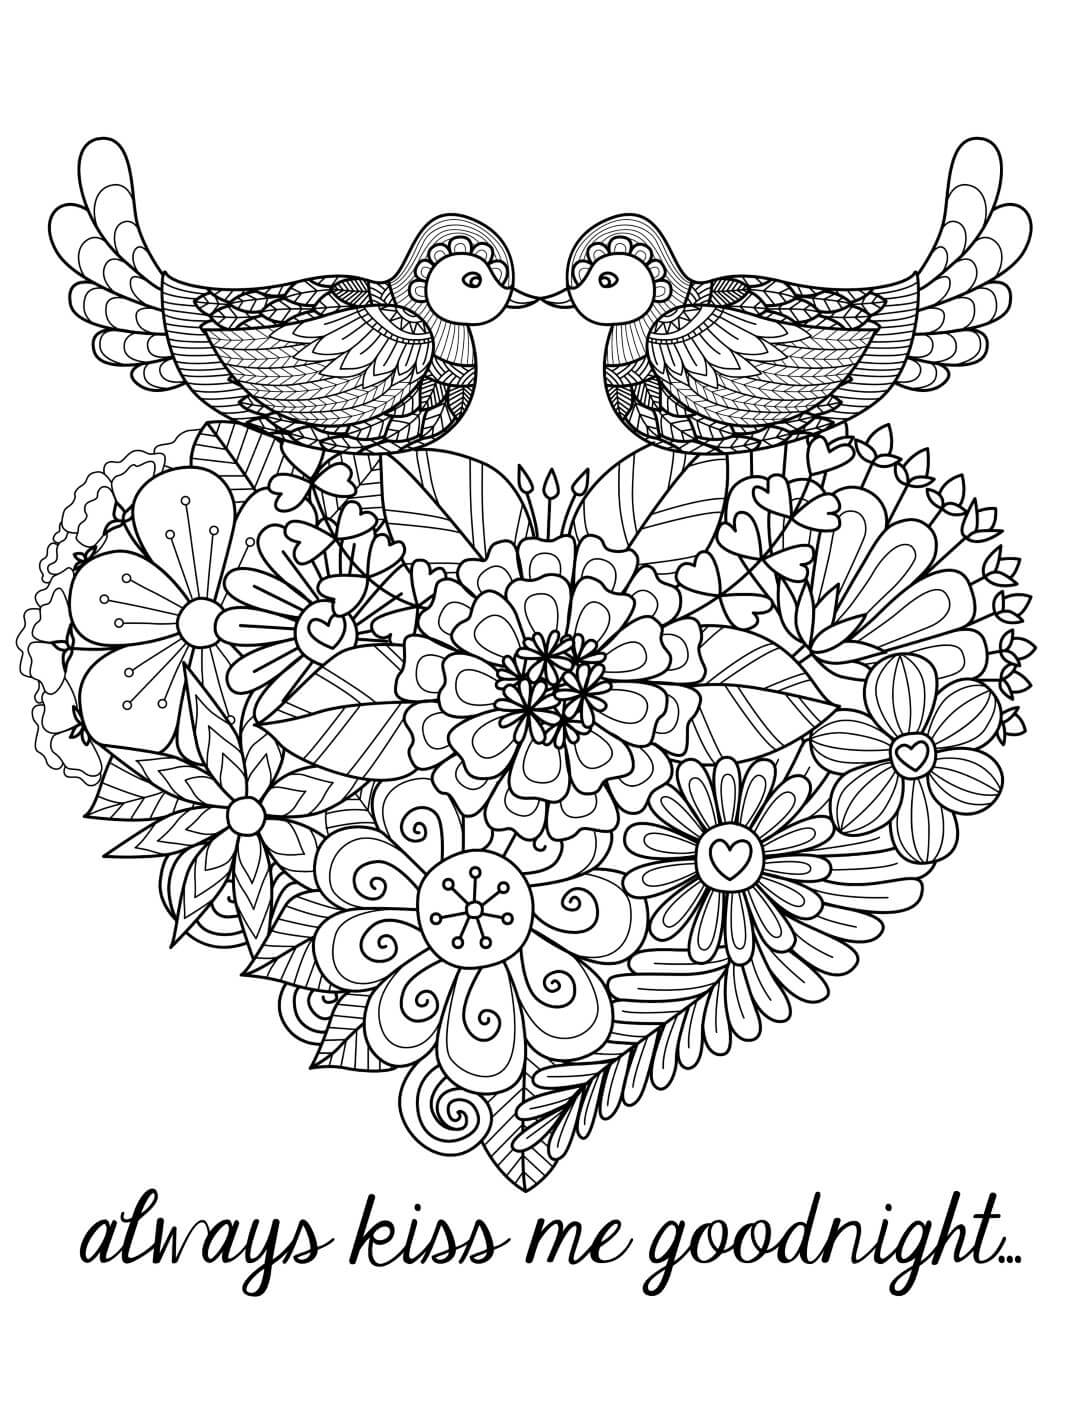 Heart Coloring Page for Adults